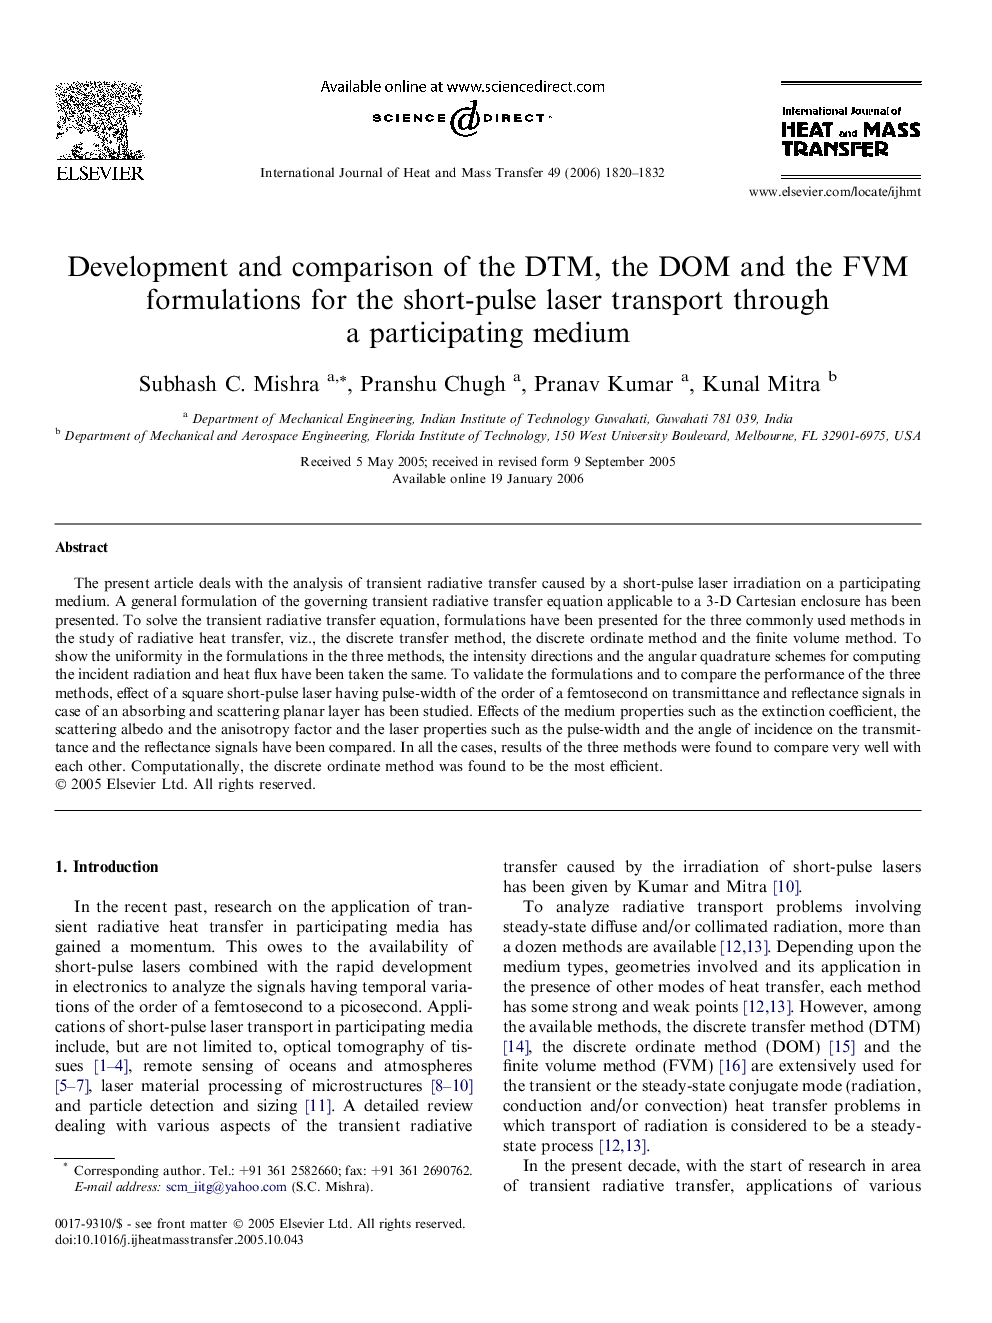 Development and comparison of the DTM, the DOM and the FVM formulations for the short-pulse laser transport through a participating medium